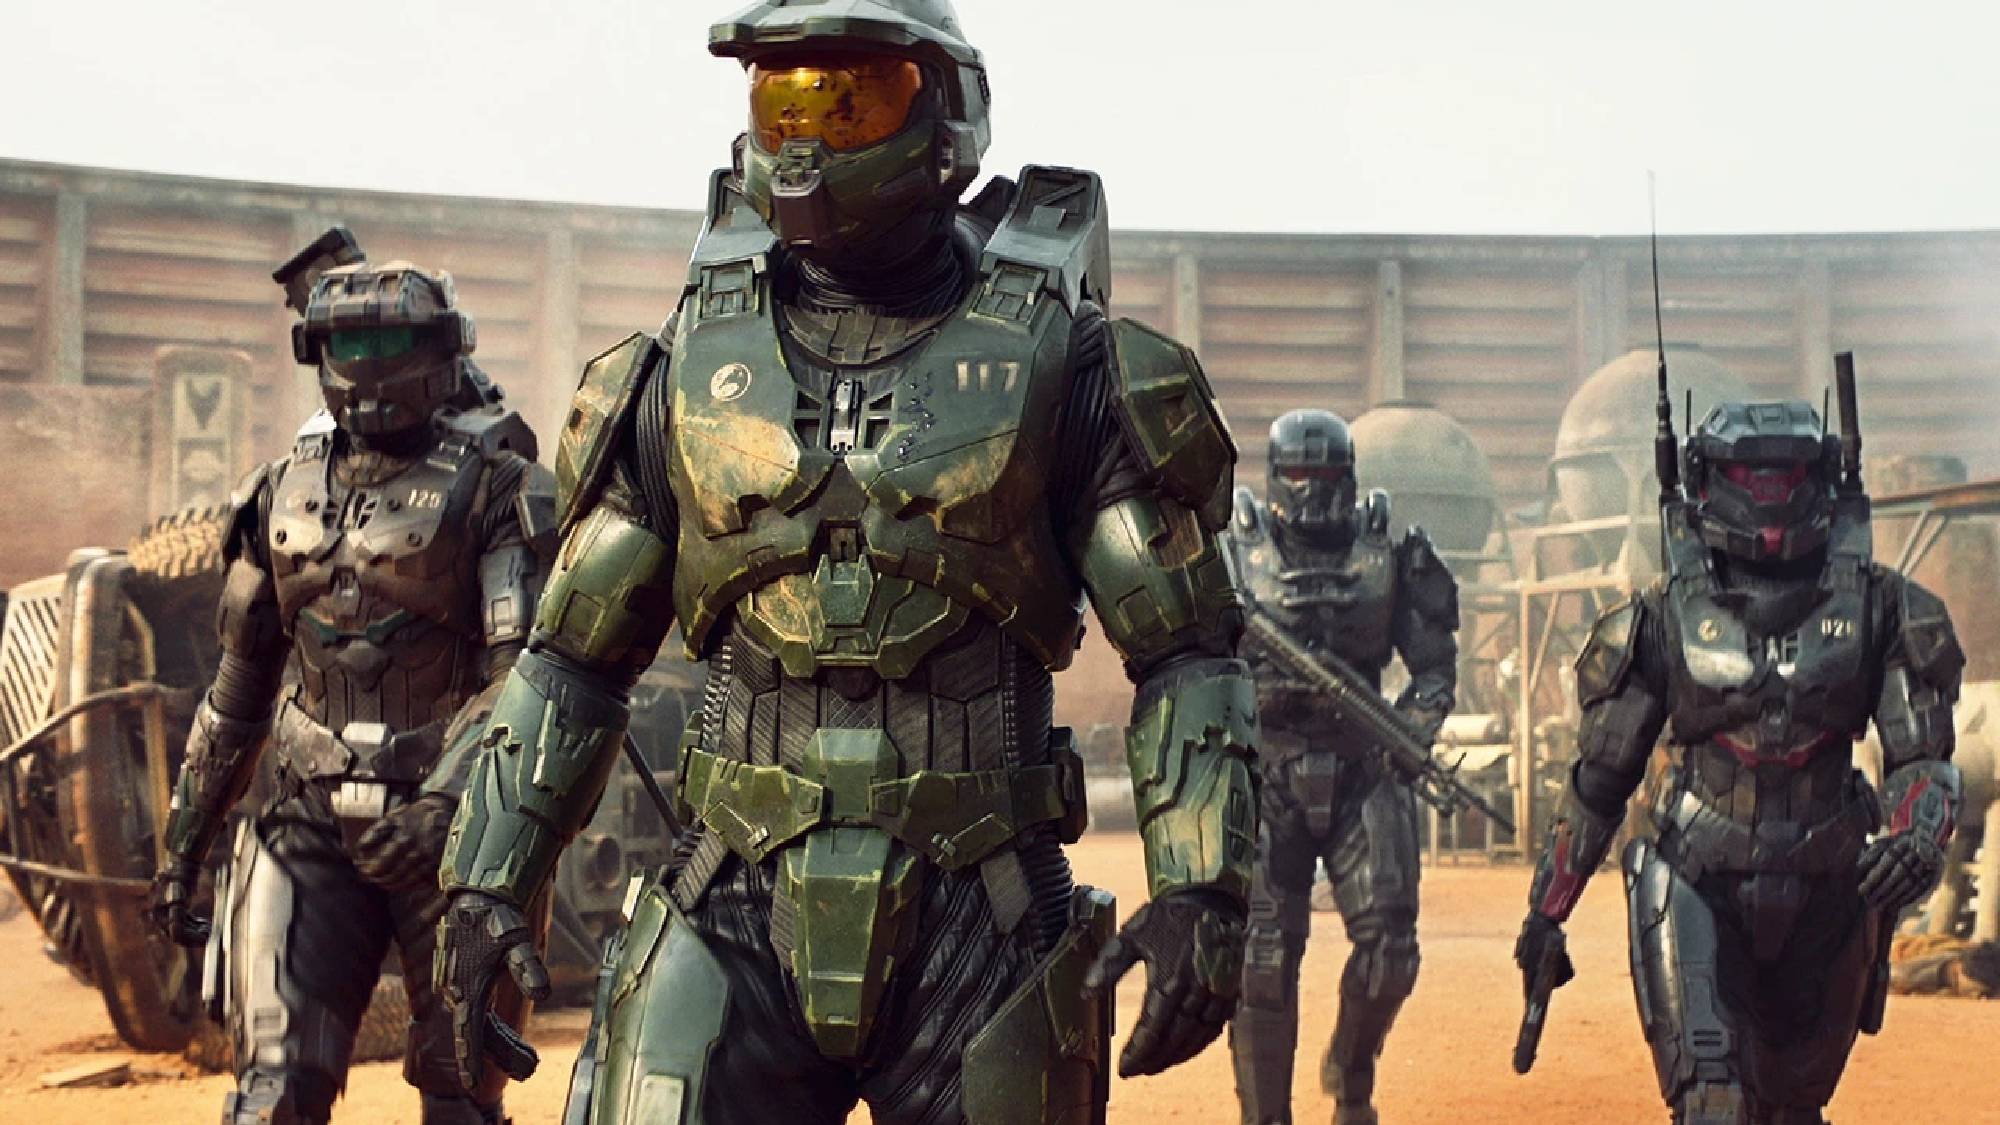 Halo TV show release date, trailer, cast and more Tom's Guide